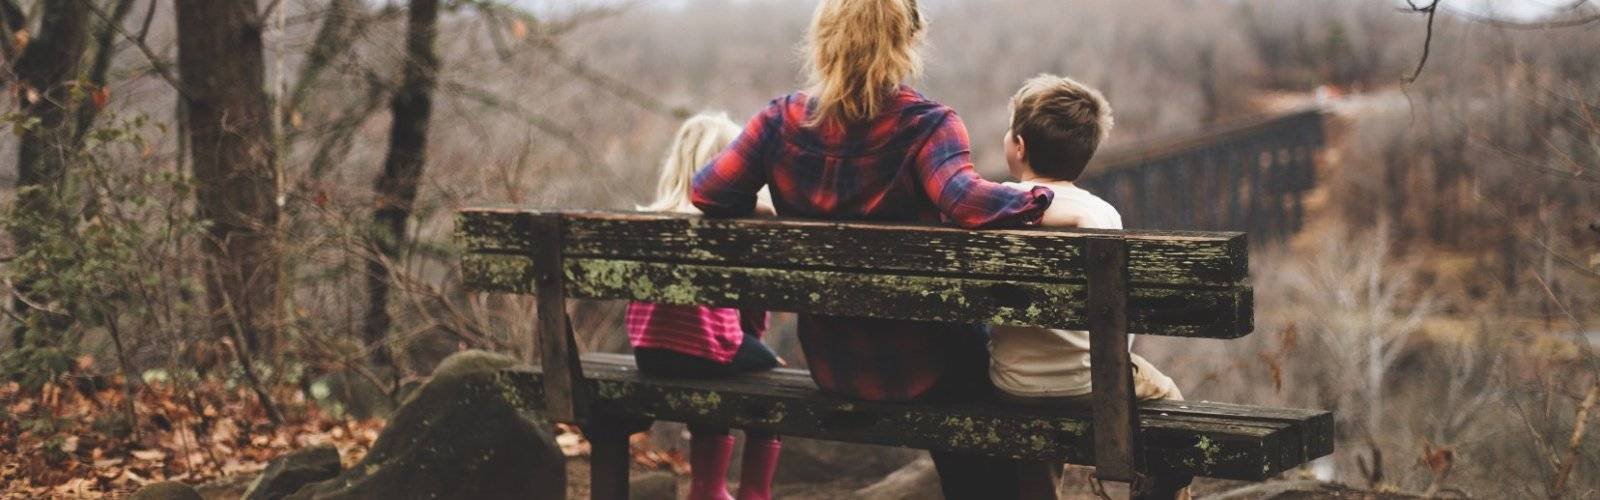 Photo credit: Benjamin Manley. A woman wearing flannel sits on a bench with two young children, back to the viewer.